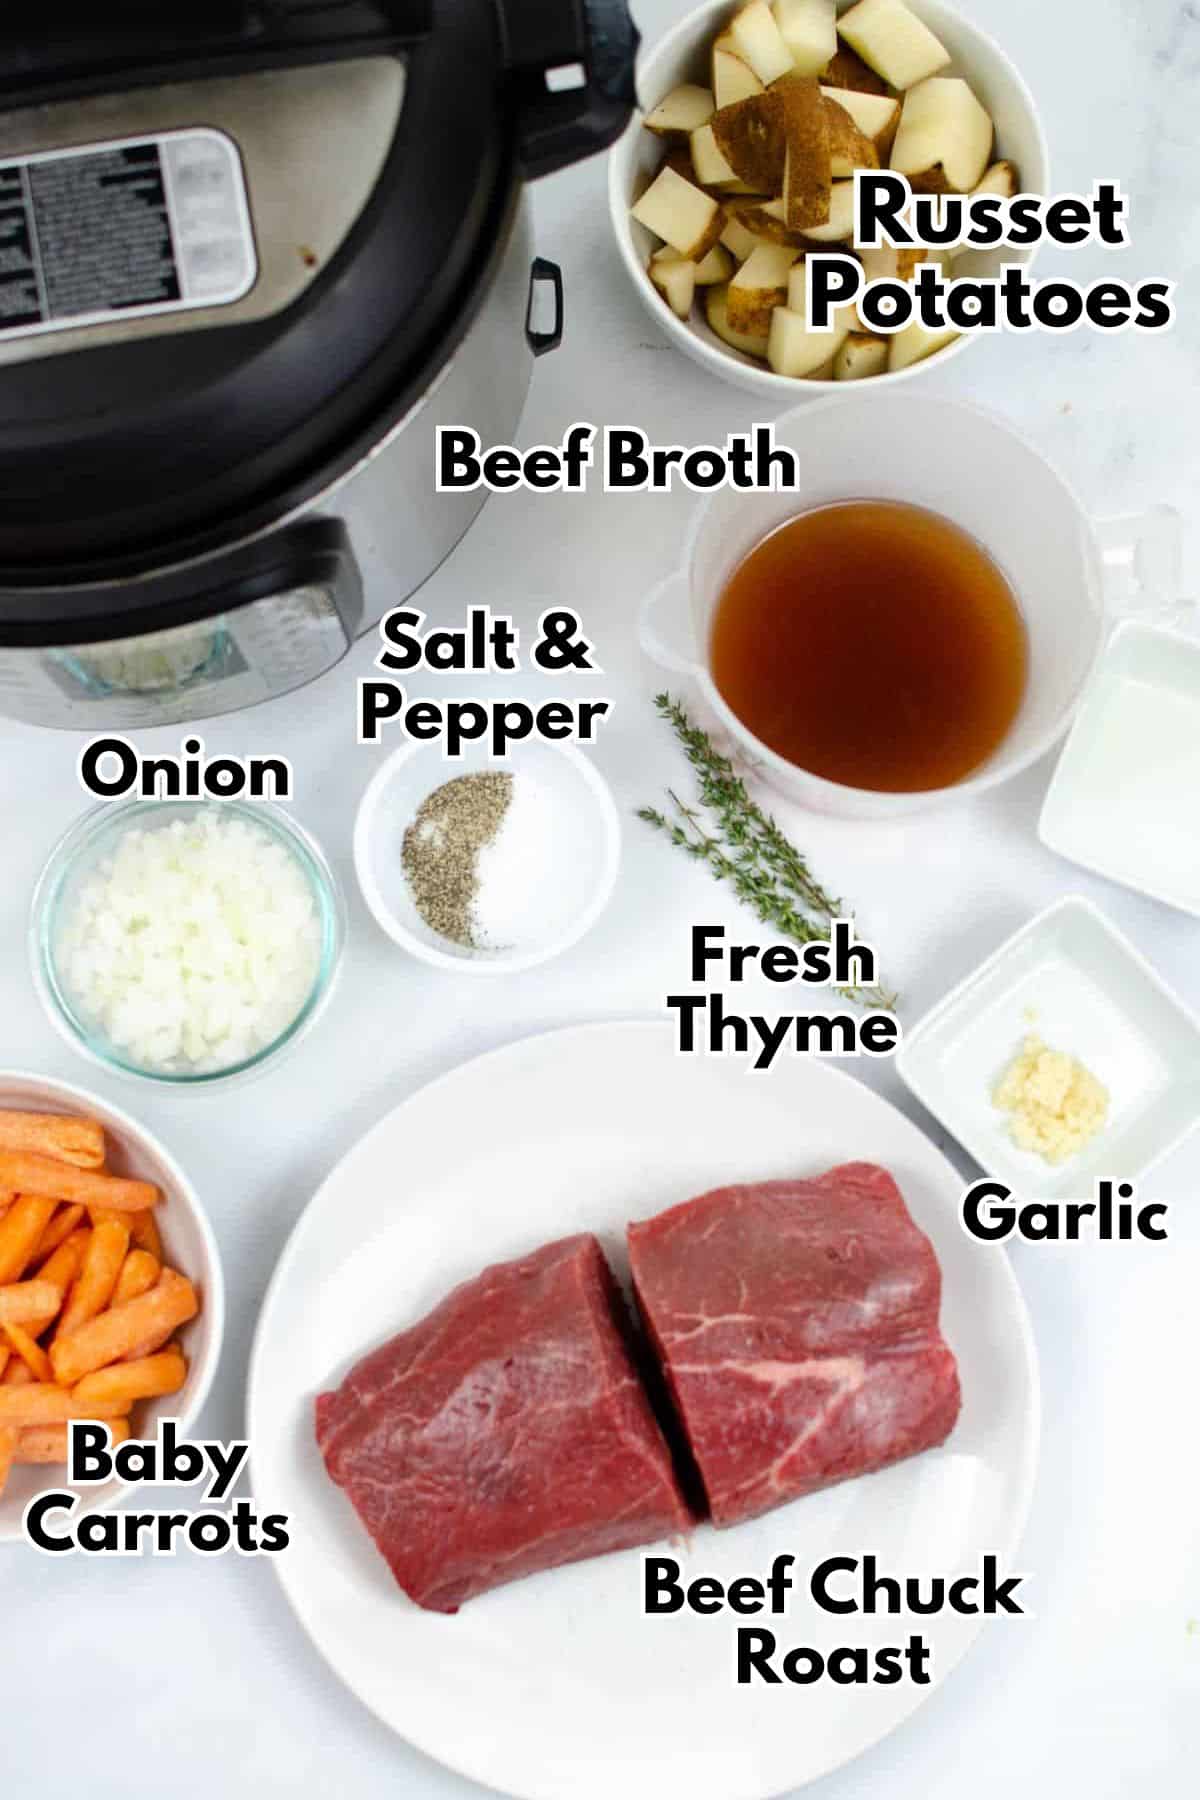 Ingredients needed to make instant pot roast with potatoes and carrots.